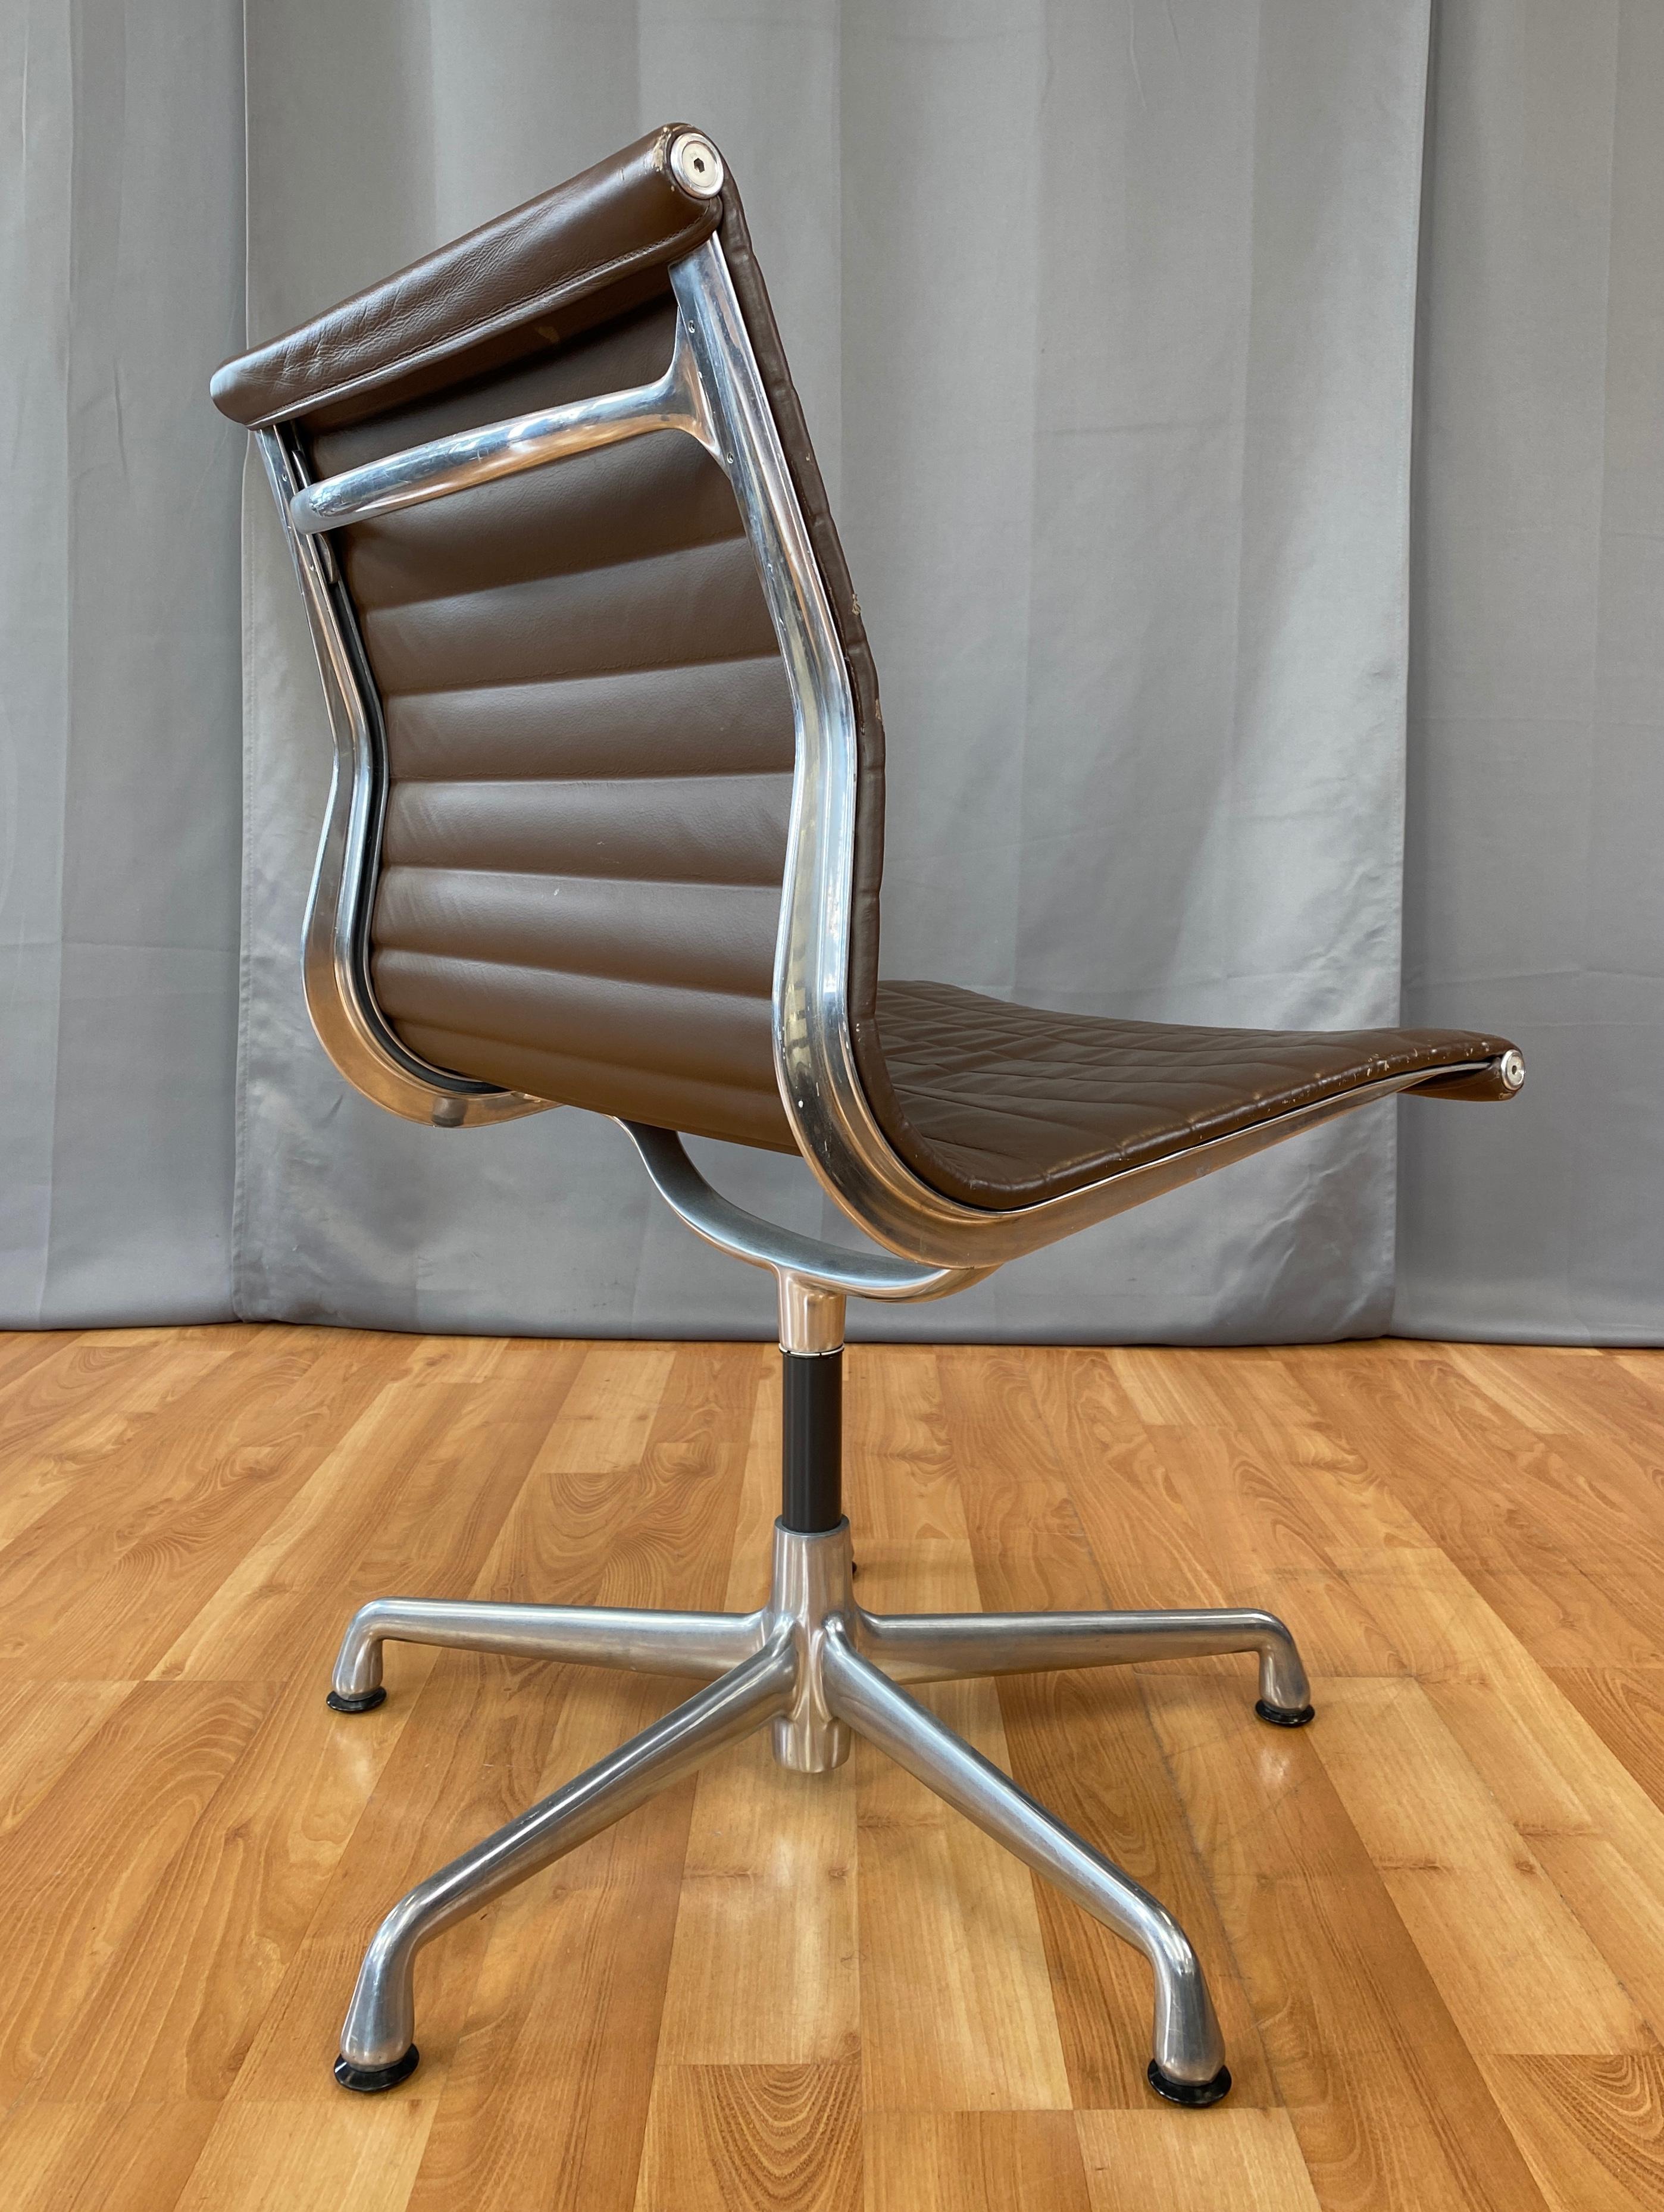 Contemporary Eames Aluminum Group Side Chair, in Brown Leather 5 Star Base